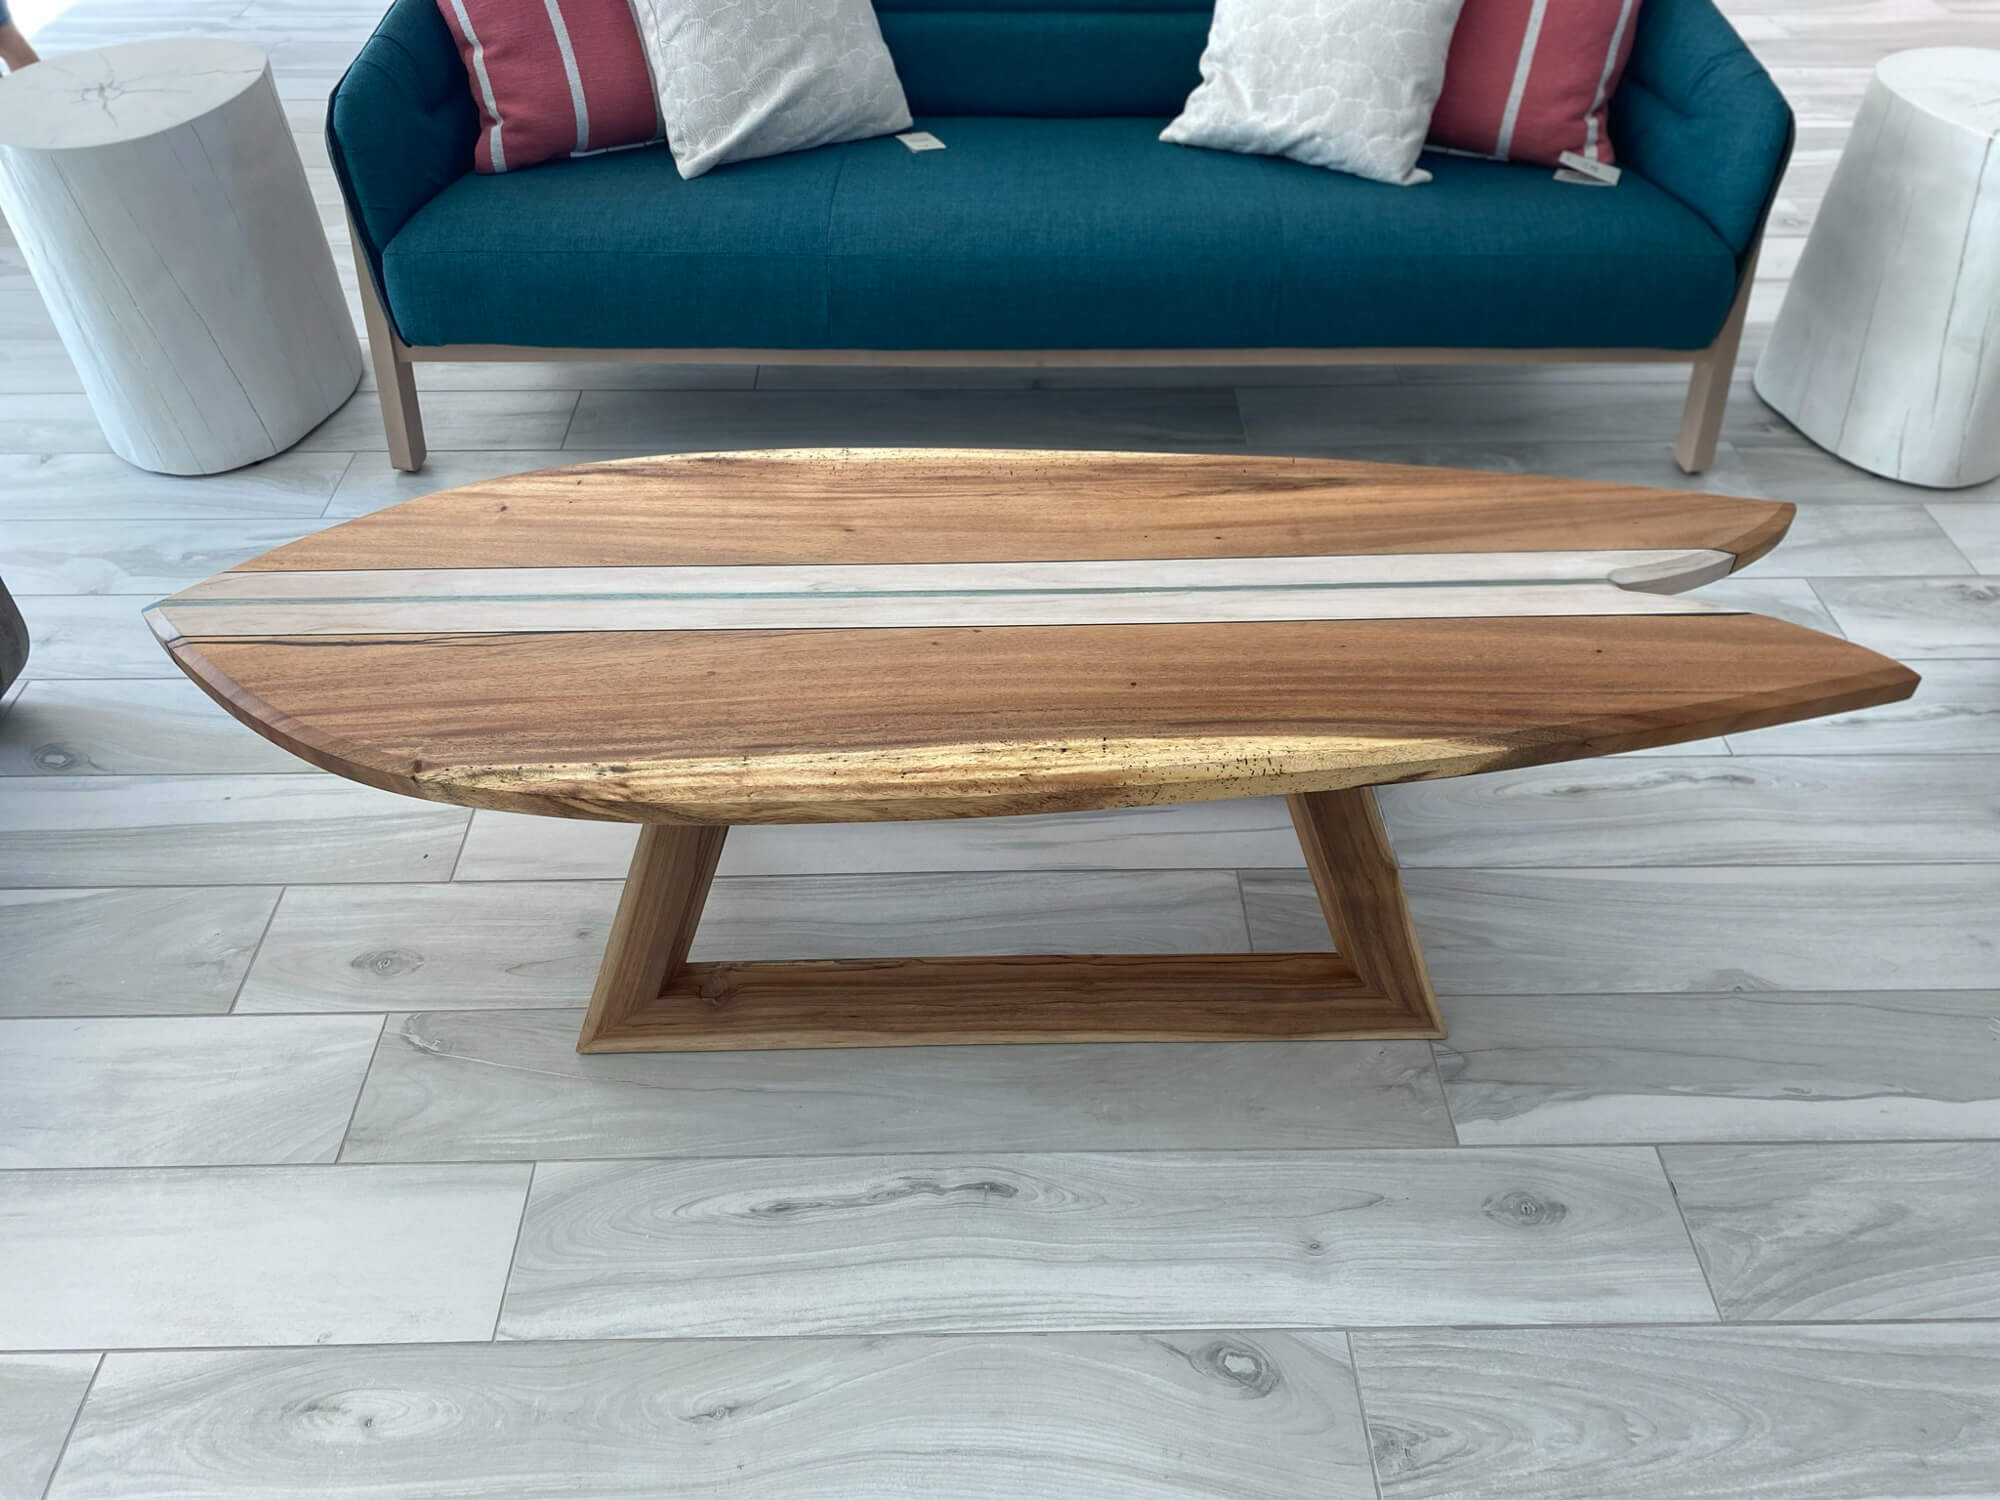 Wood coffee table shaped like surfboard made from monkeypod and teak. This wood project is finished with Rubio Monocoat hardwax oils.